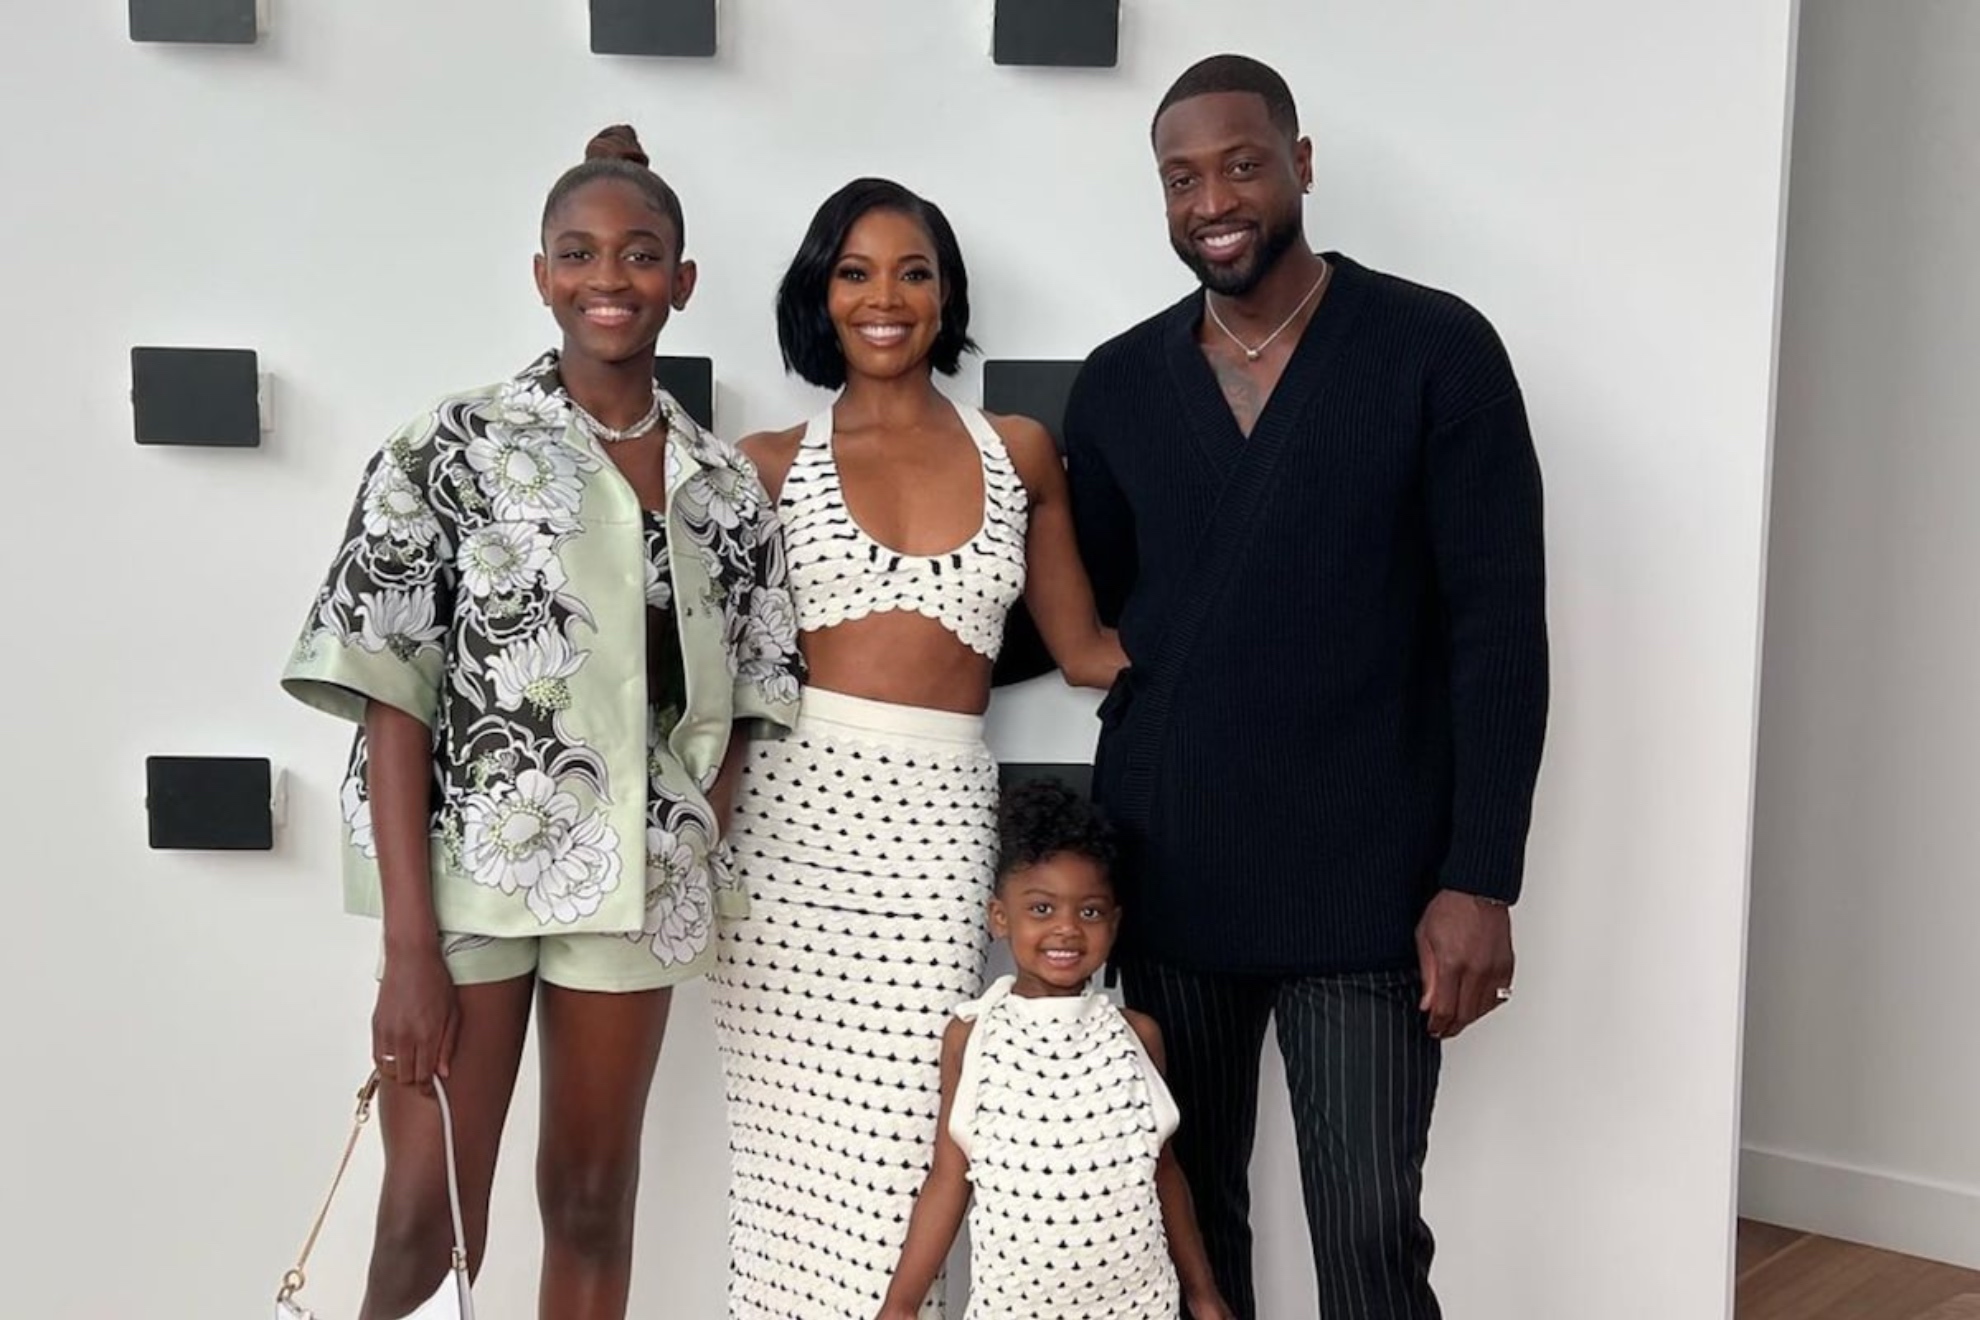 Dwayne Wade with his family.